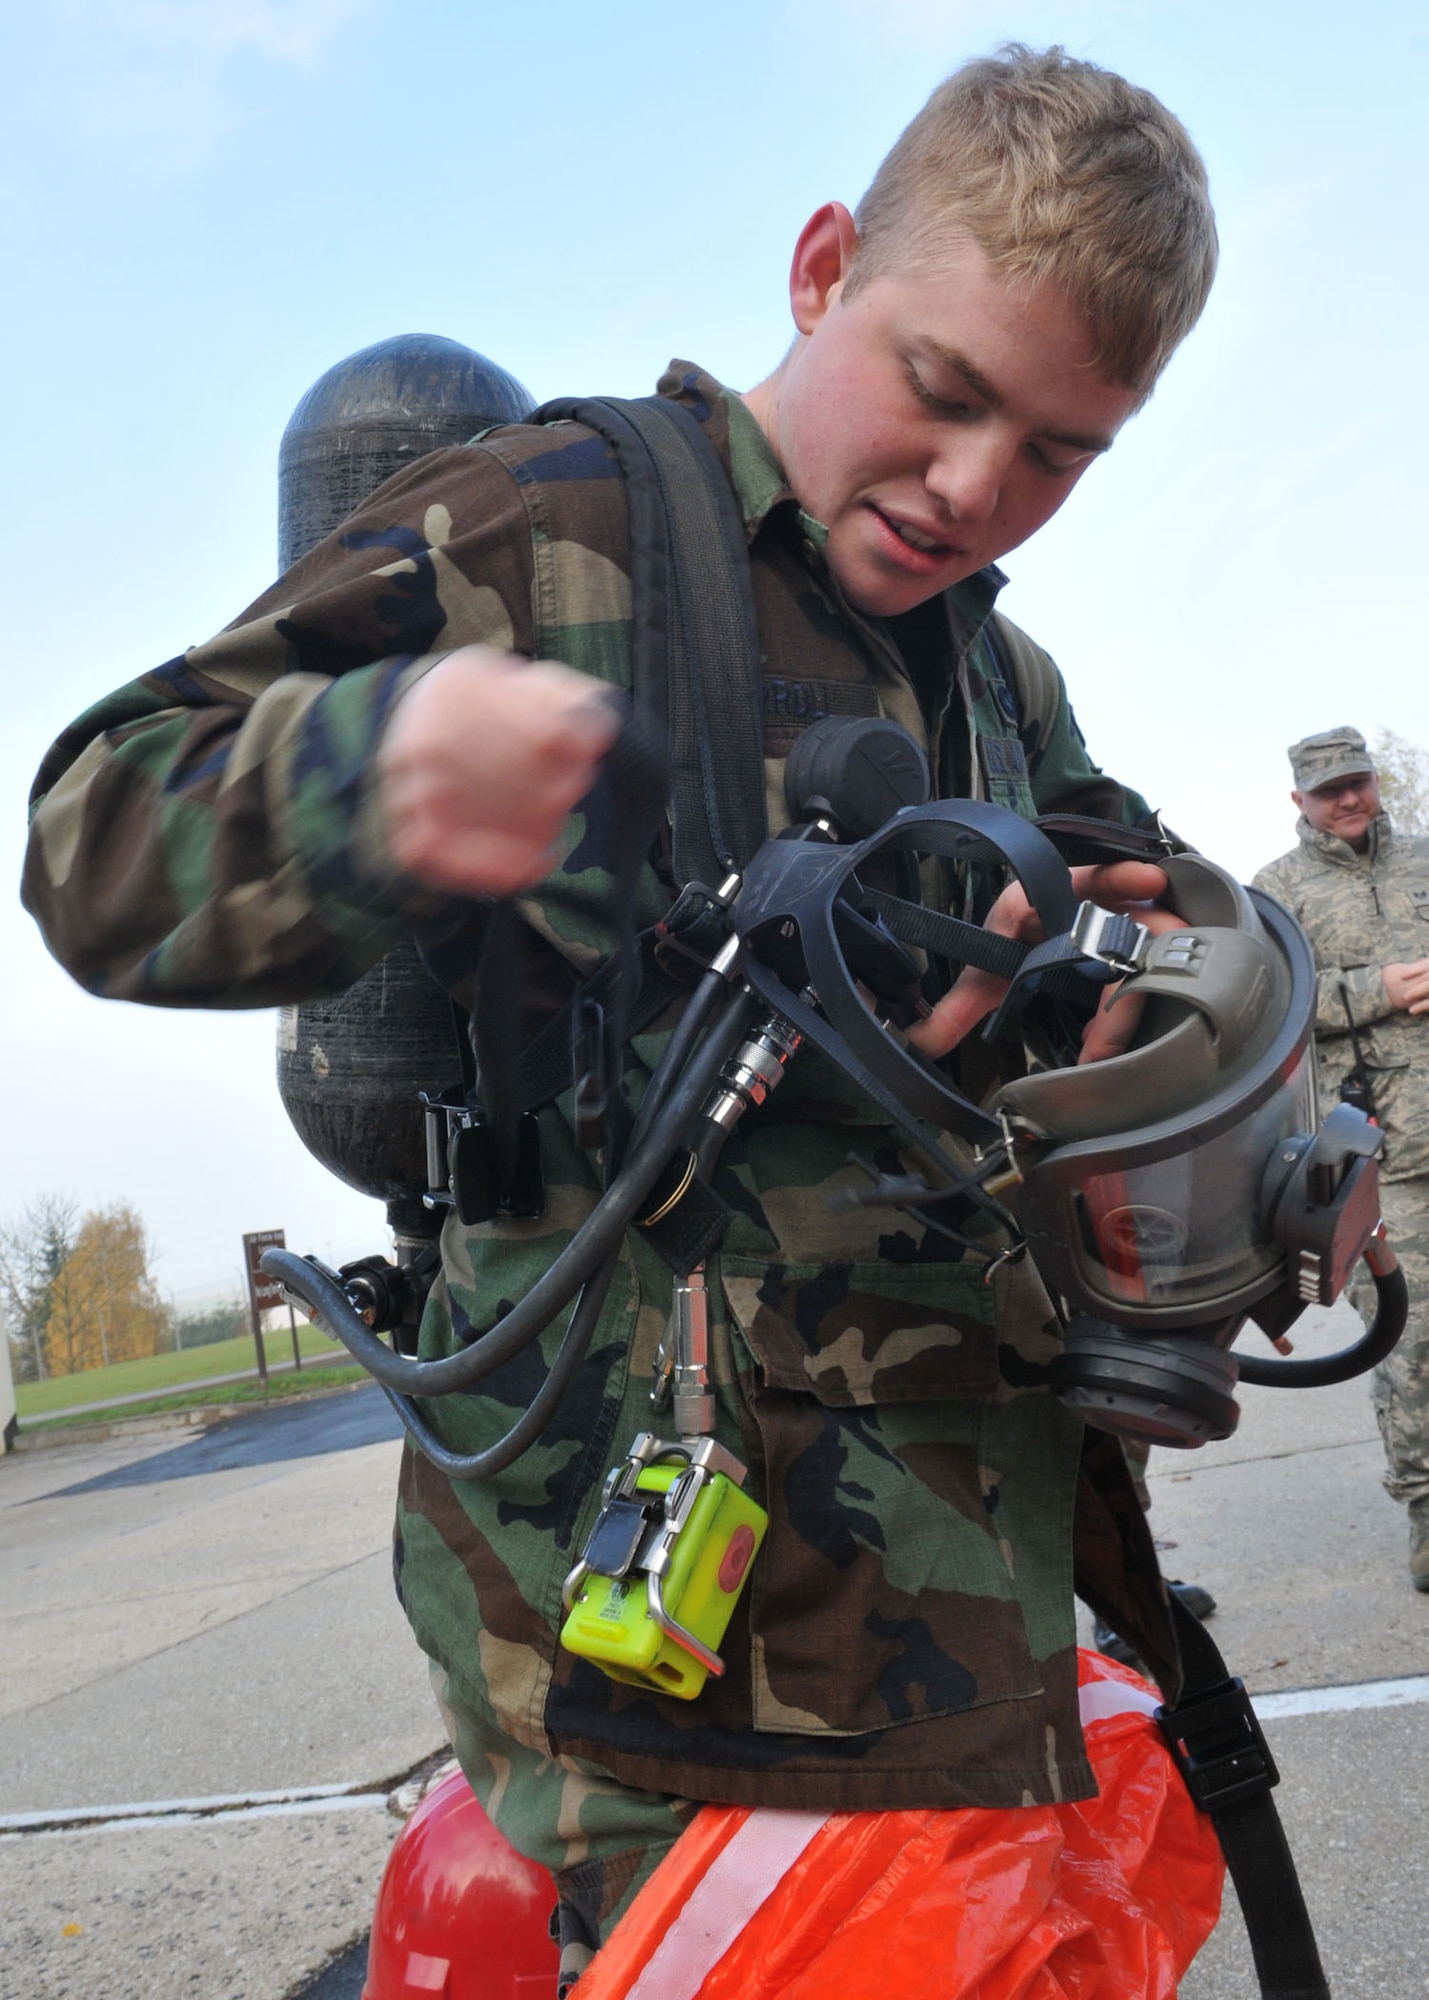 SPANGDAHLEM AIR BASE, Germany -- Airman 1st Class Scott Carrol, 52nd Civil Engineer Squadron, demonstrates how to put on a class-A hazmat response suit during an on-scene commander's course Oct. 30. The course gave individuals training and certification to be a commander of an incident or work in an emergency operations center. (U.S. Air Force photo/Airman 1st Class Nick Wilson) 